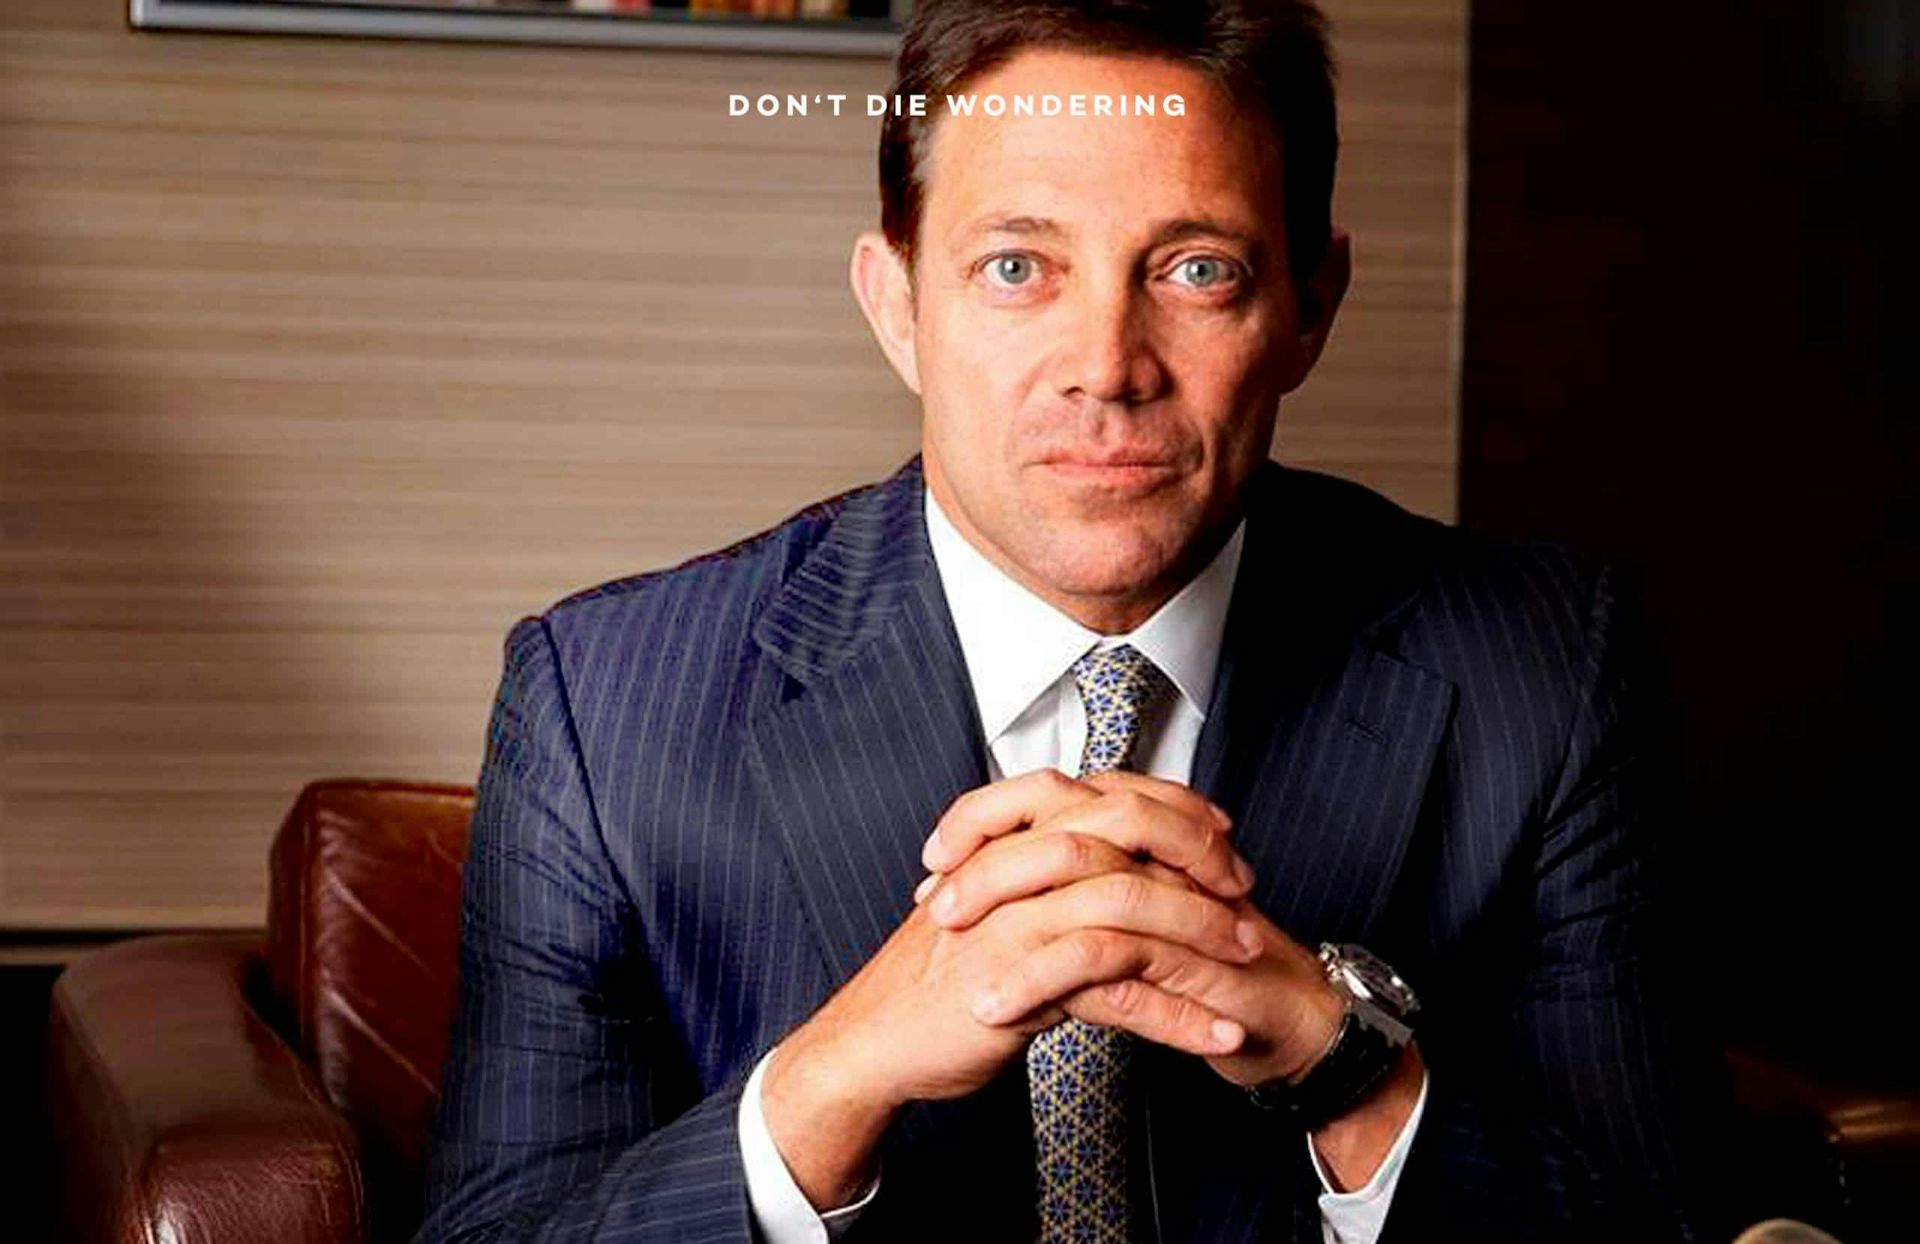 The Wolf Of Wall Street: Where Is The Real Jordan Belfort Now?